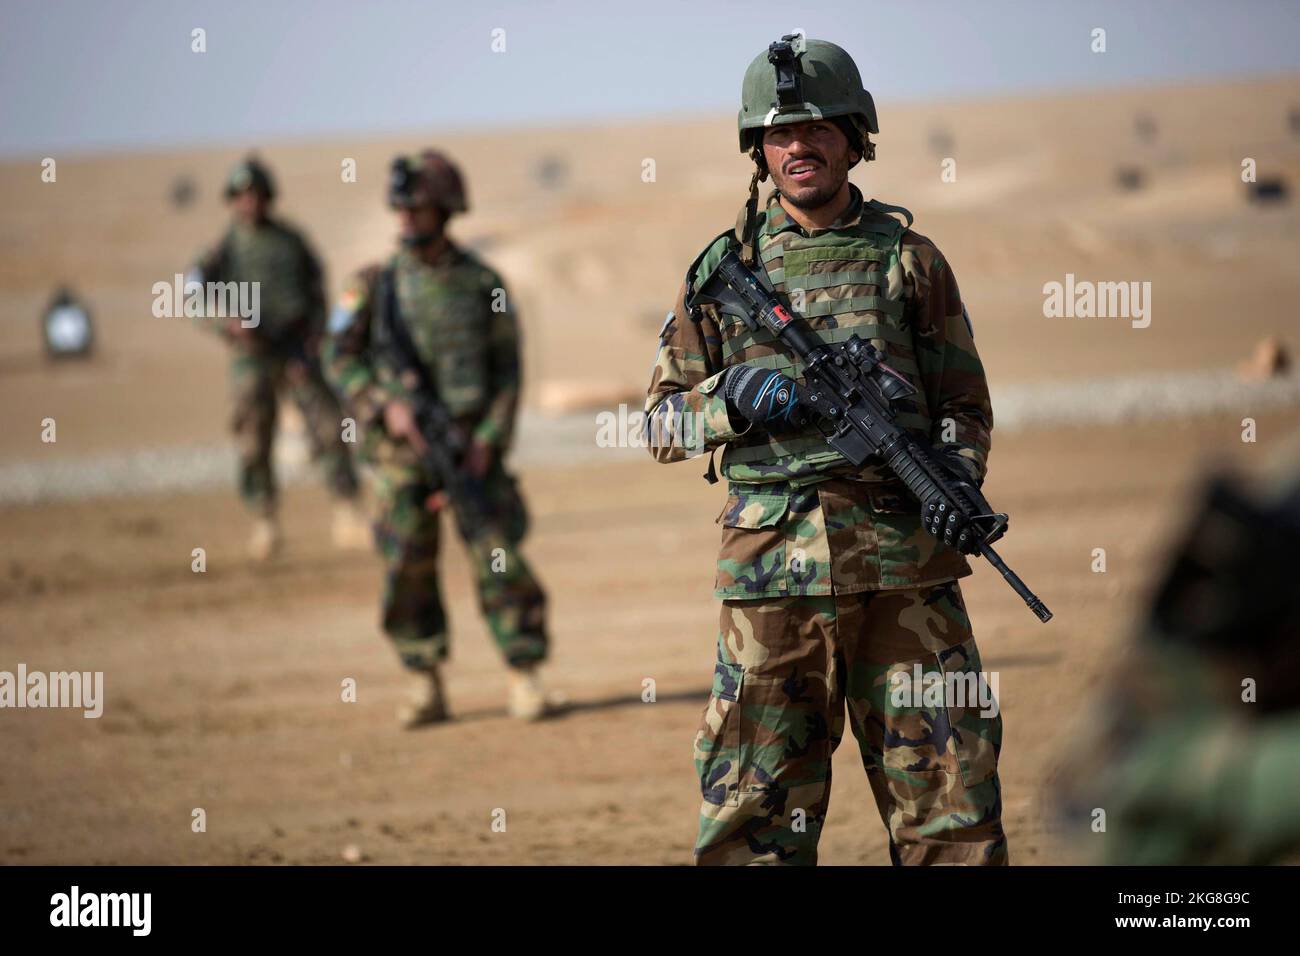 HeLMAND PrOVINCE, AFGHANISTAN - 02 February 2013 - Afghan Commandos from 3rd Company, 7th Special Operations Kandak participate in react to fire drill Stock Photo